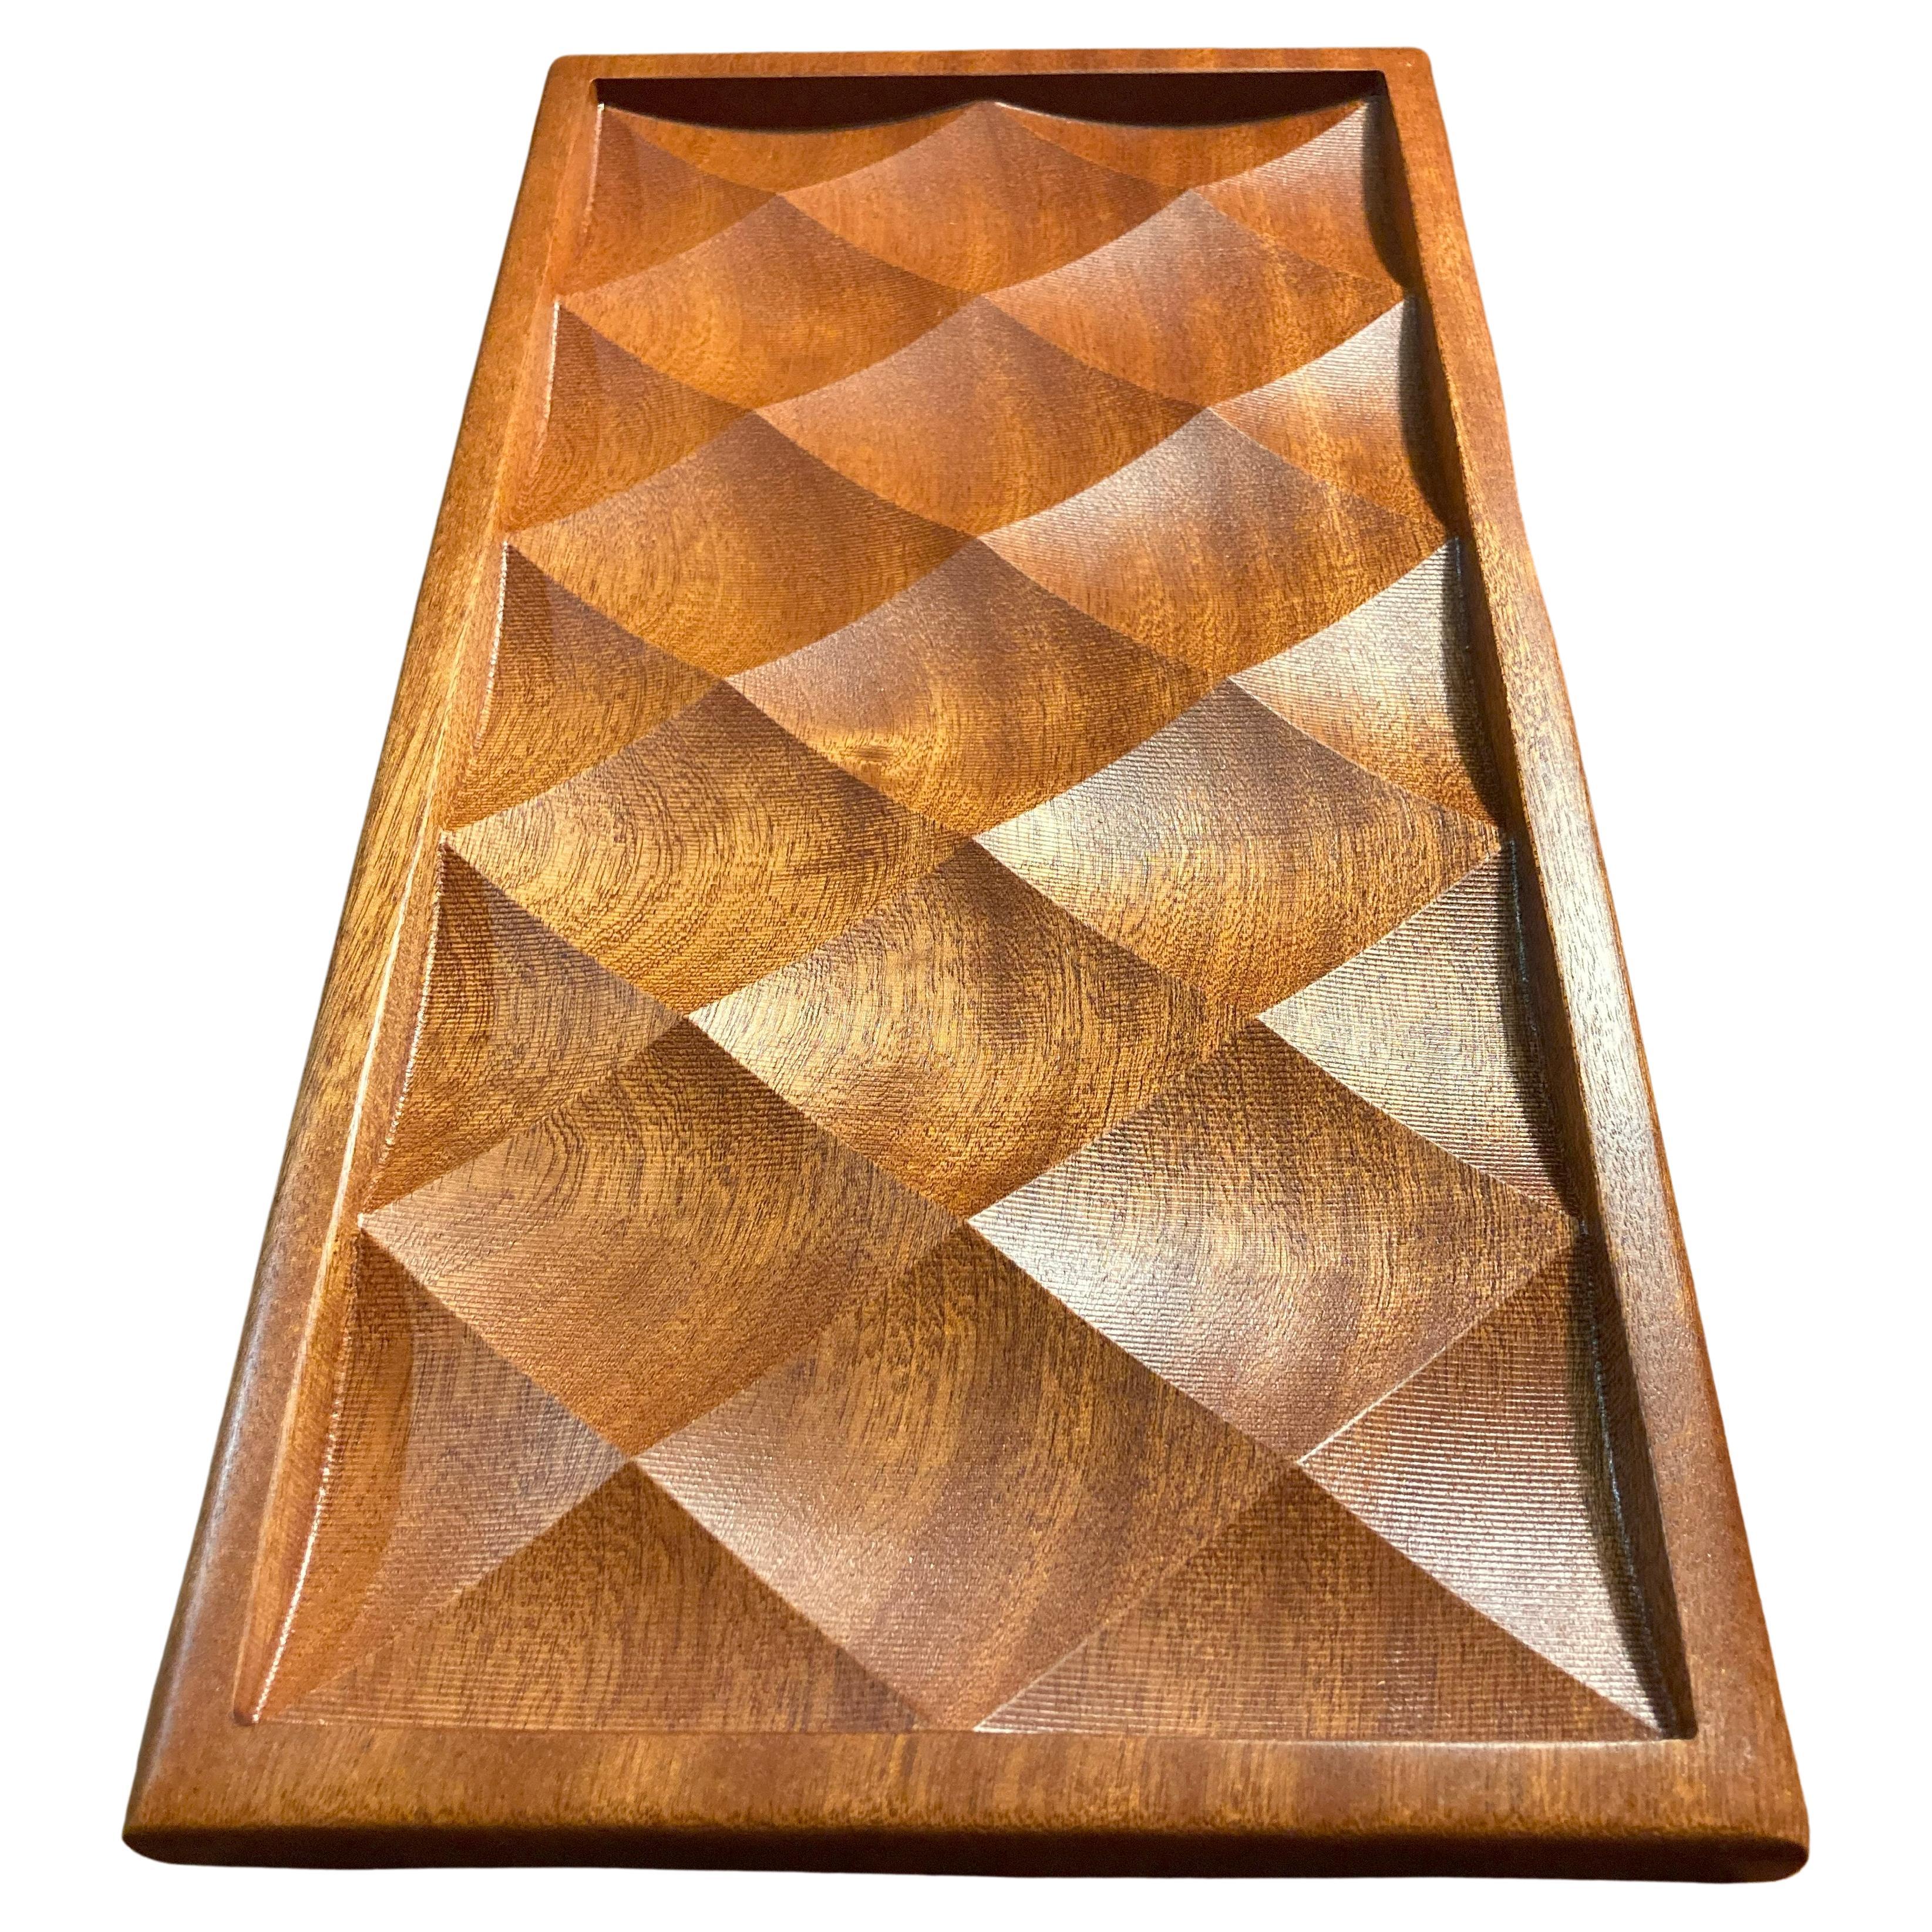 Wood Valet tray vanity tray catchall tray home office dresser kitchen in stock en vente